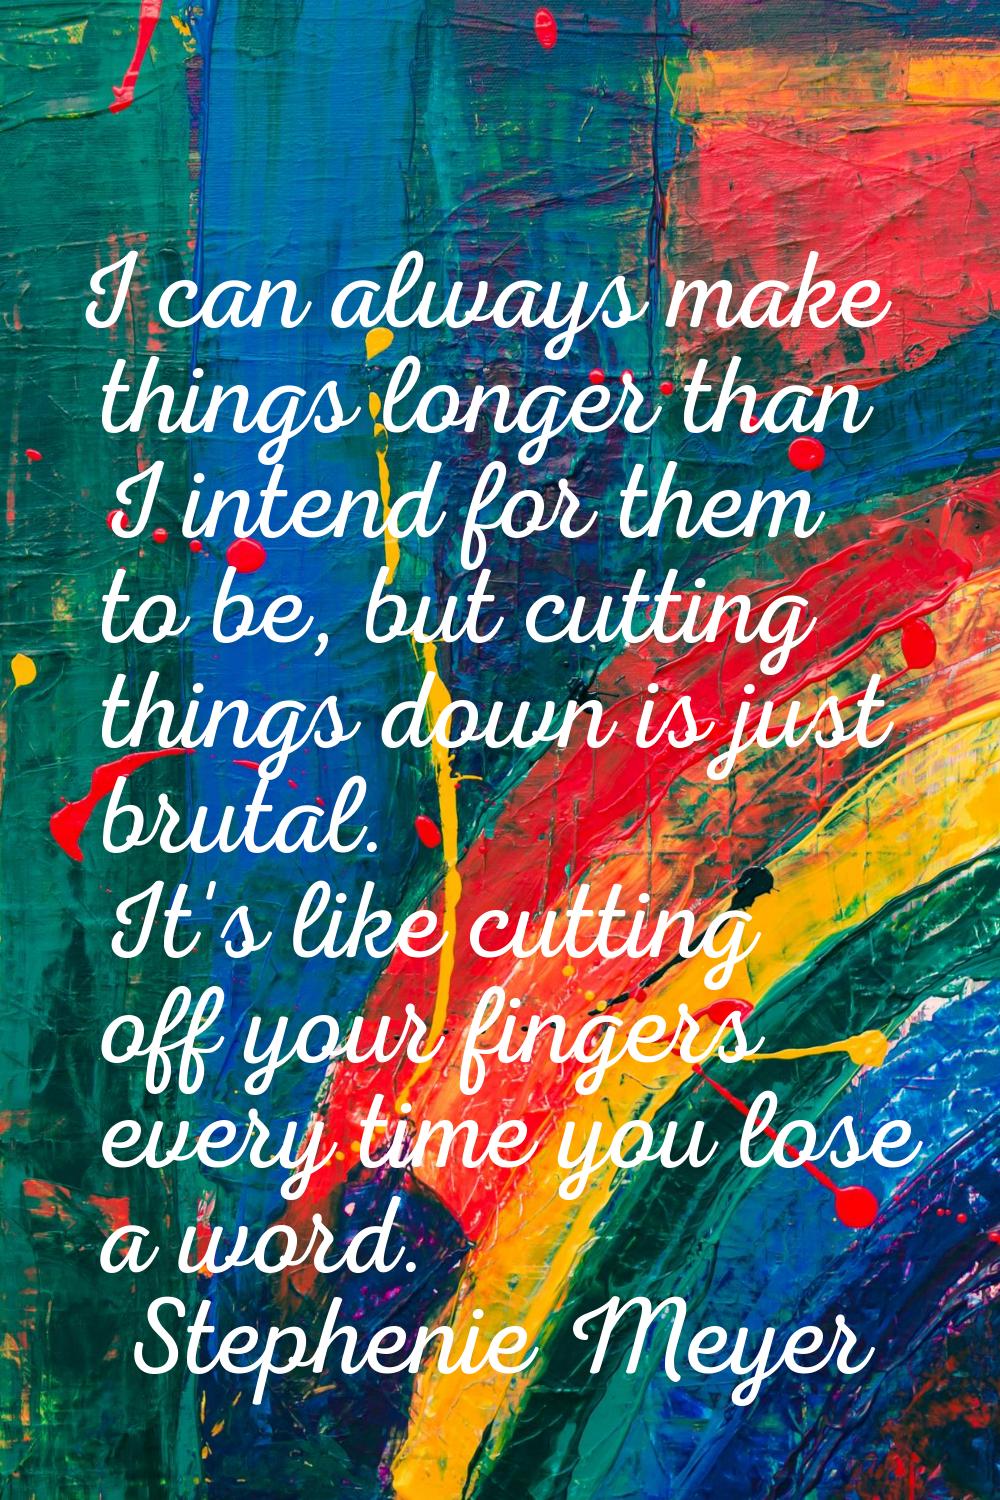 I can always make things longer than I intend for them to be, but cutting things down is just bruta